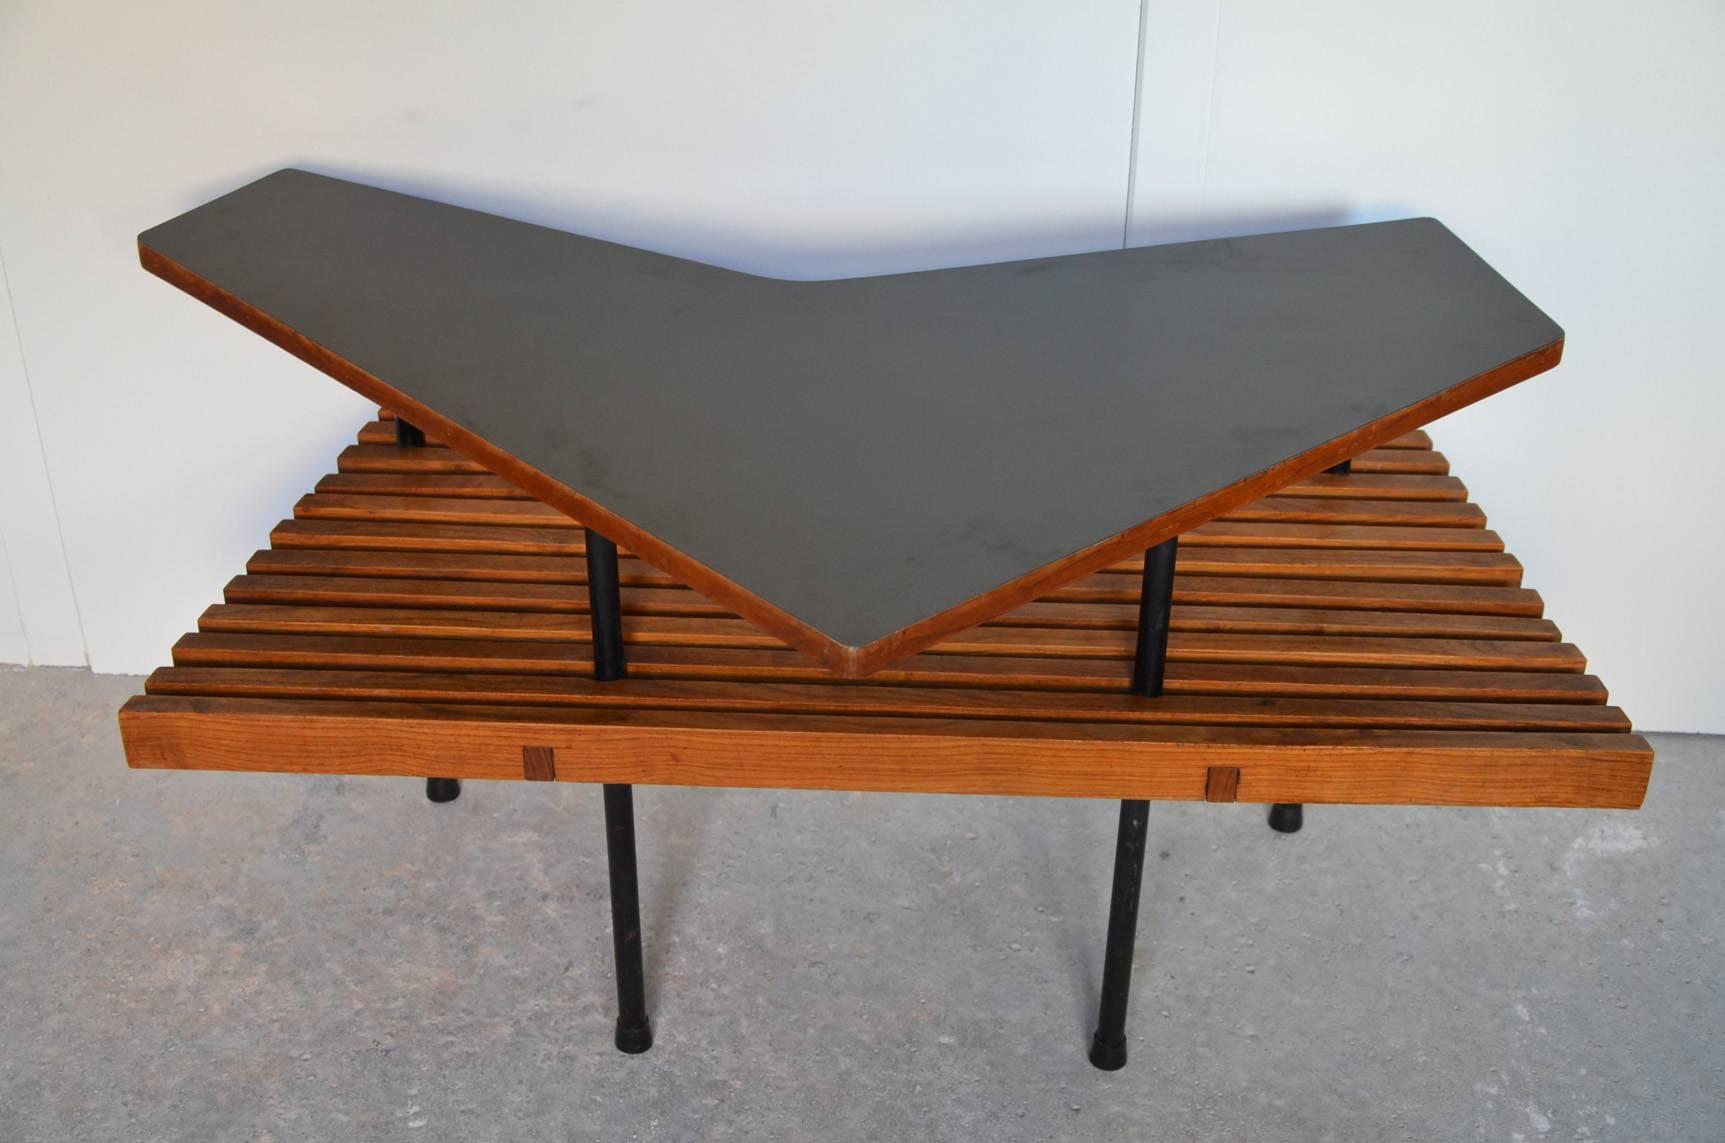 Beautiful Italian free-form cocktail table, circa 1960.
The top has been refited.